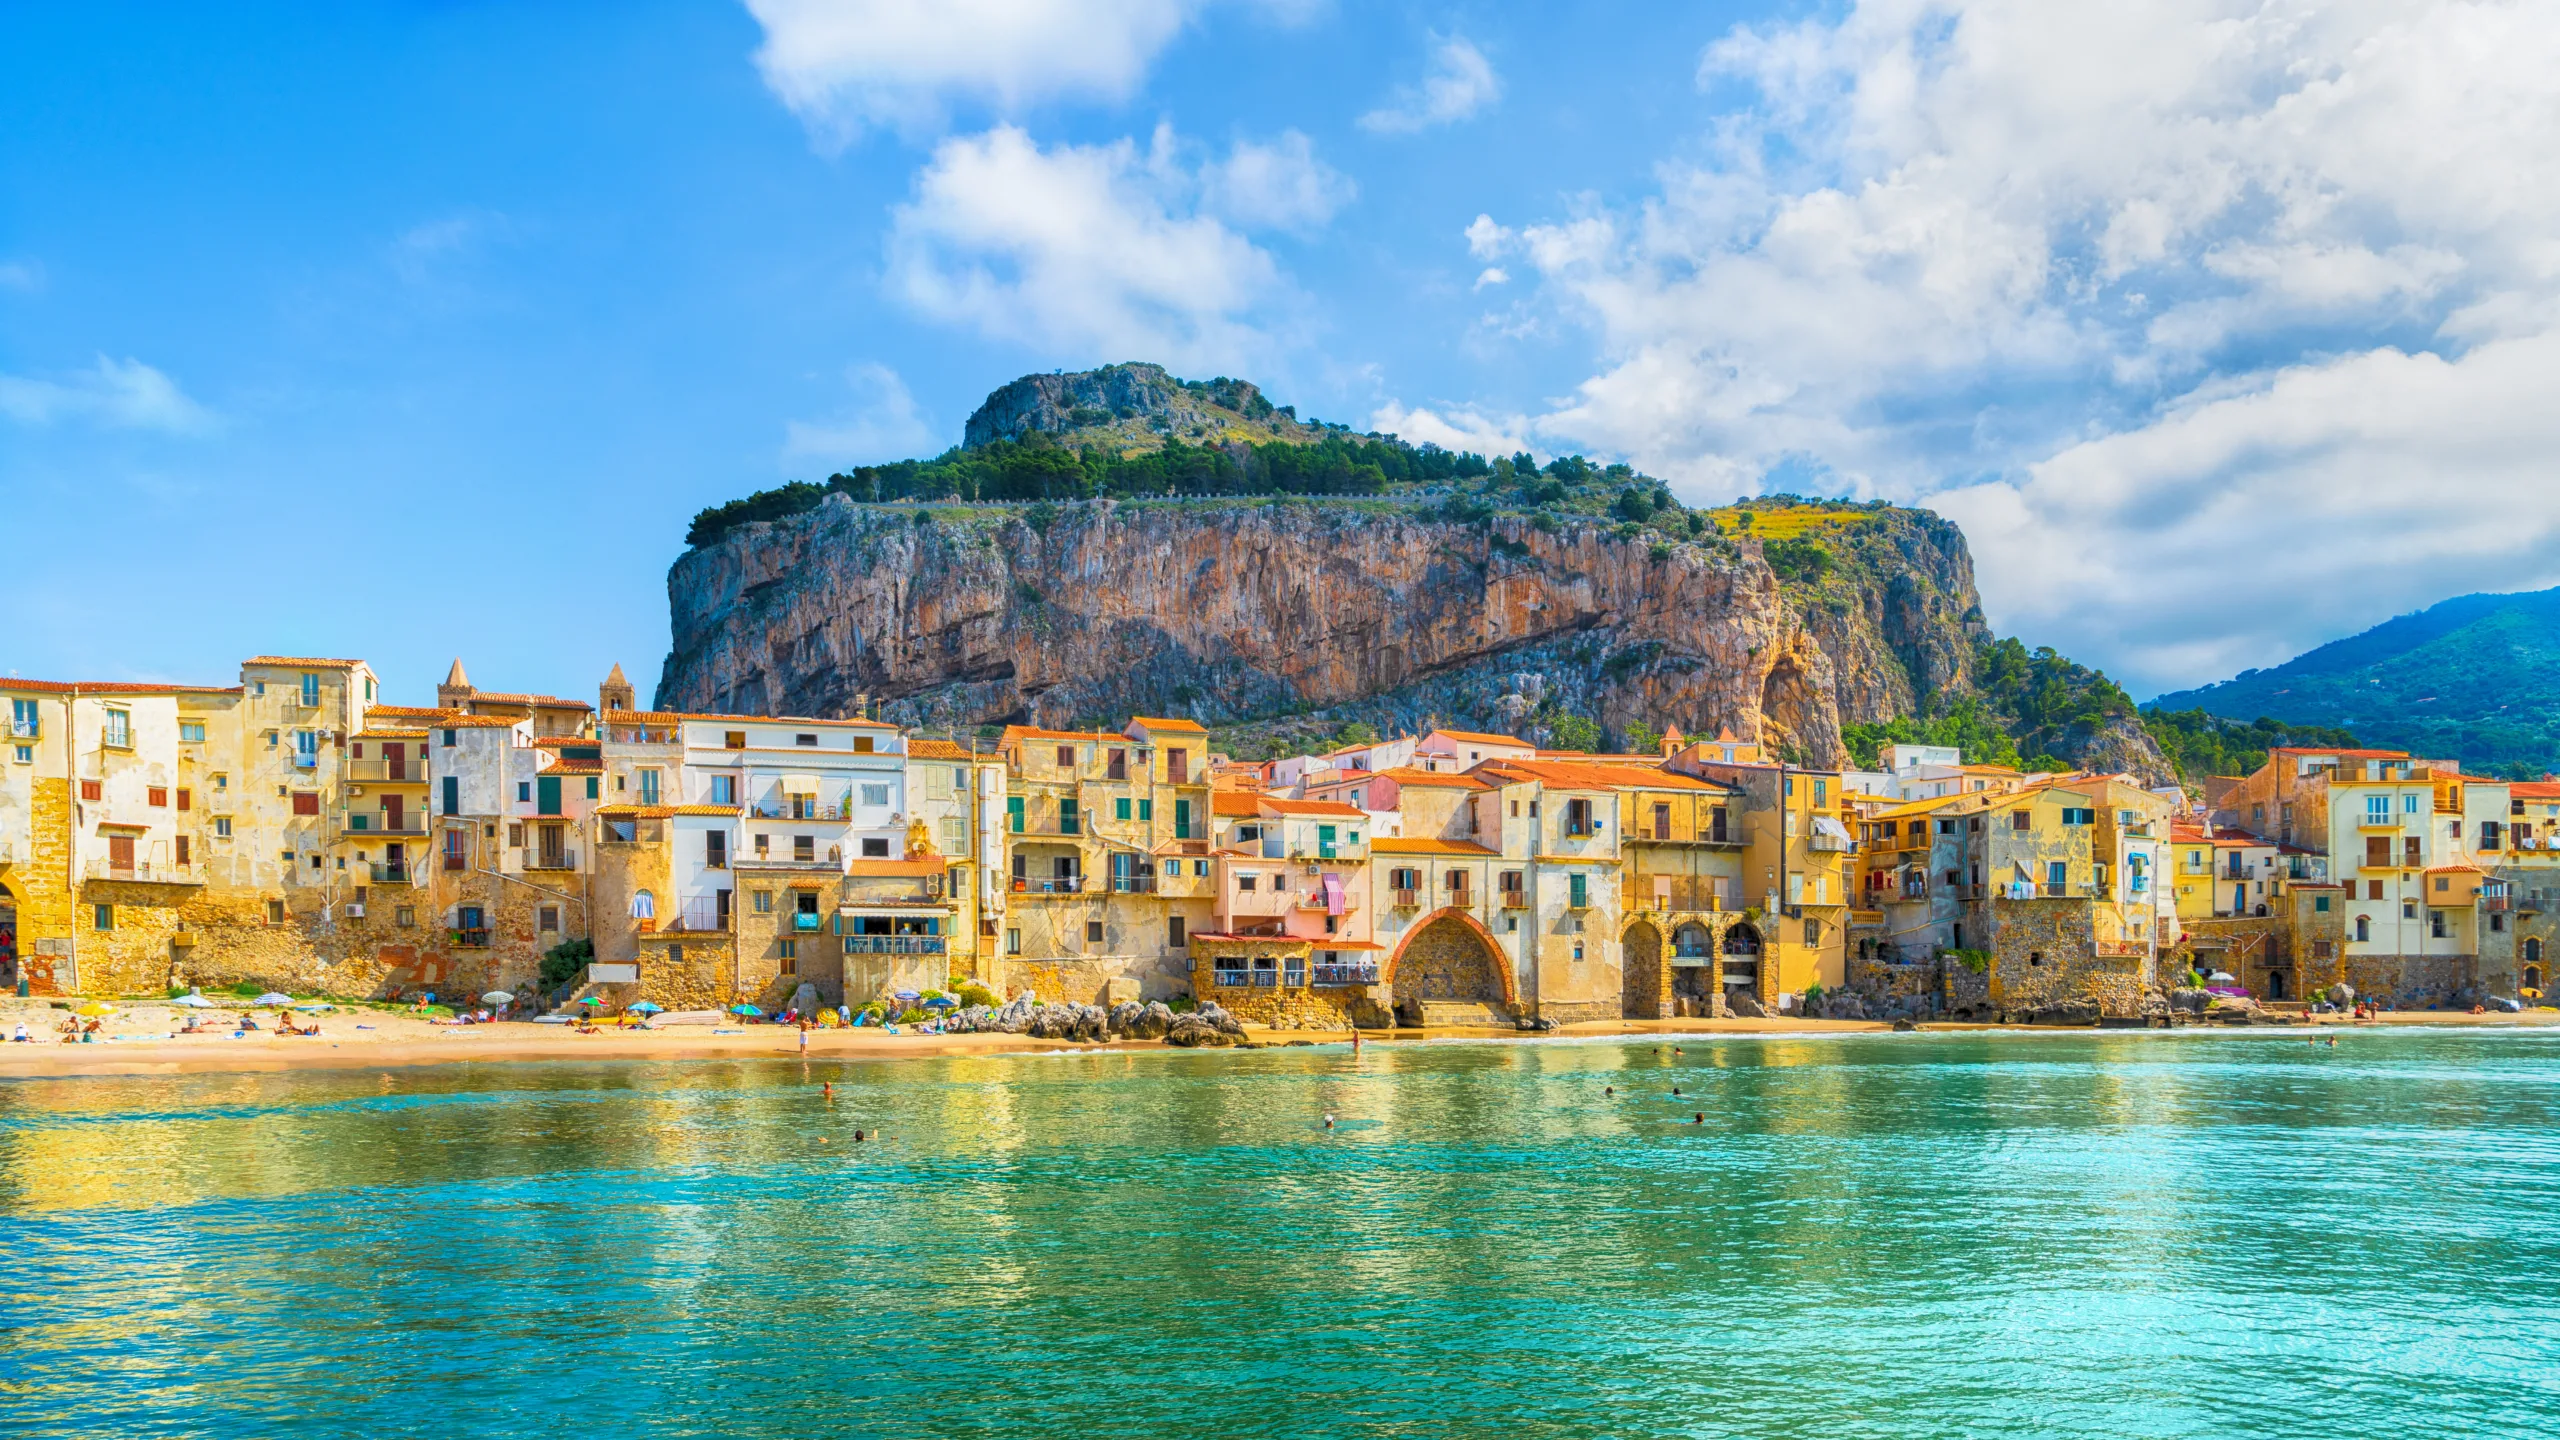 Cefalu Medieval village of Sicily Island, Province of Palermo, Italy